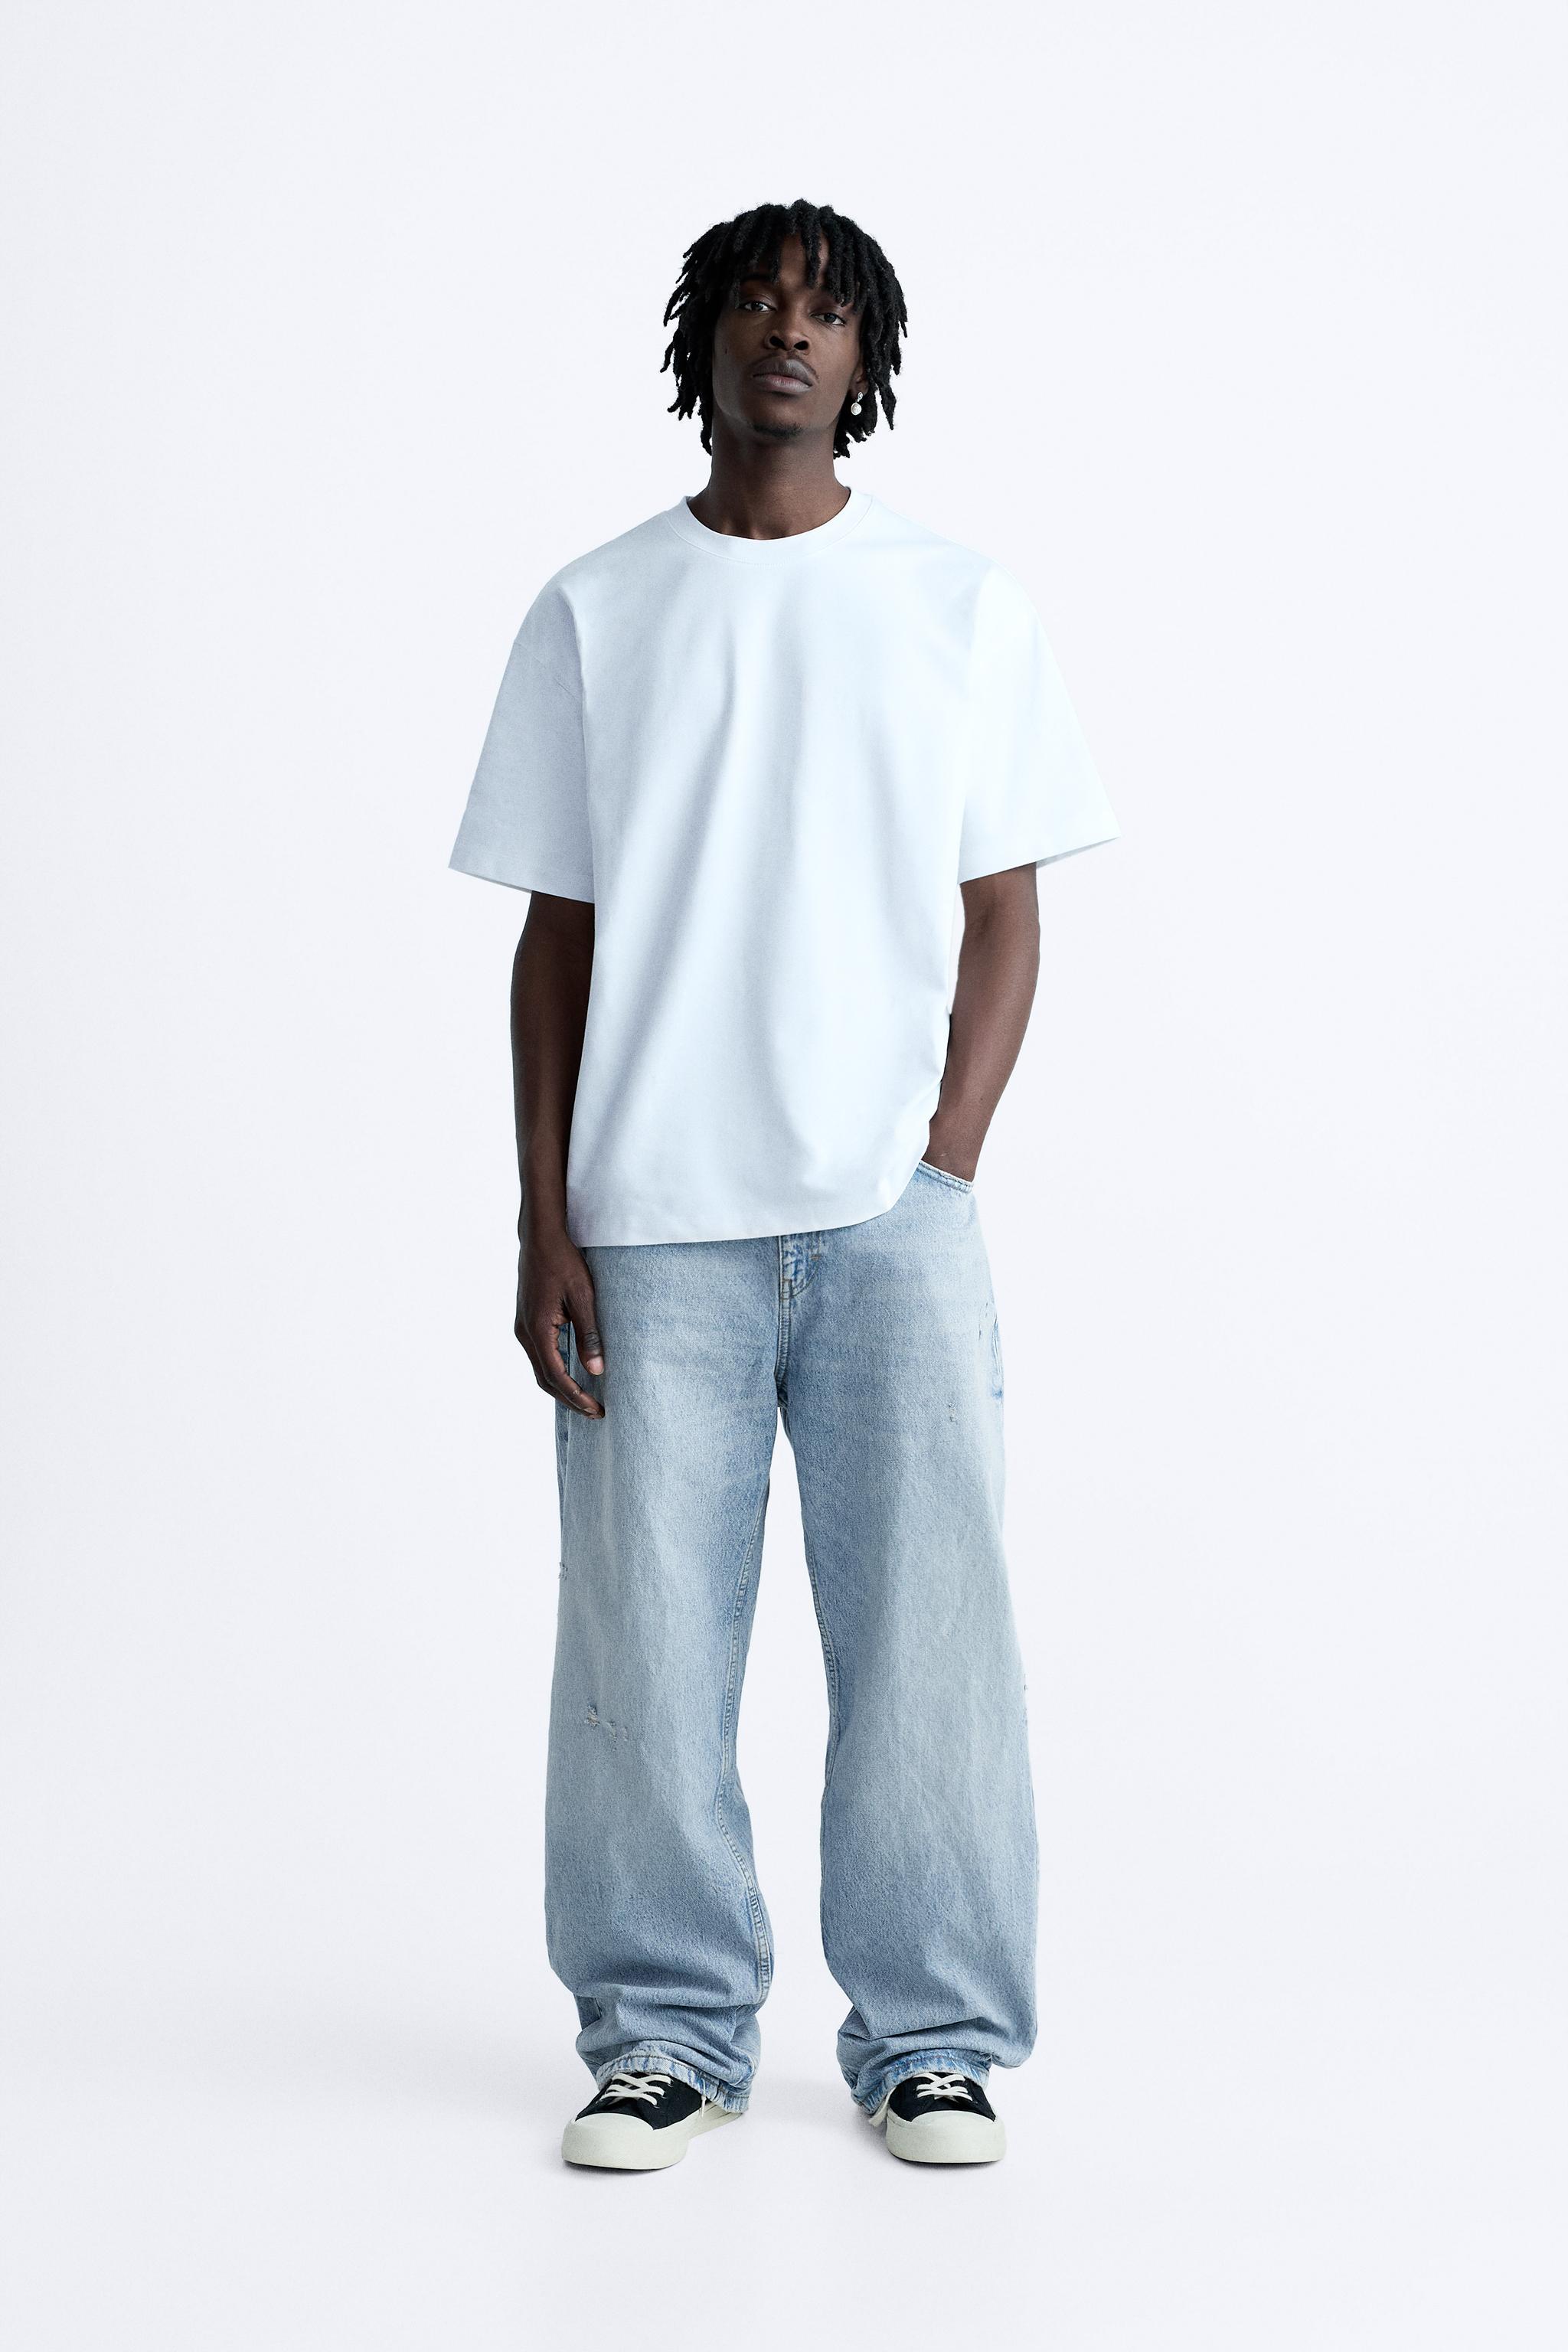 BAGGY FIT JEANS - Light blue | ZARA United States